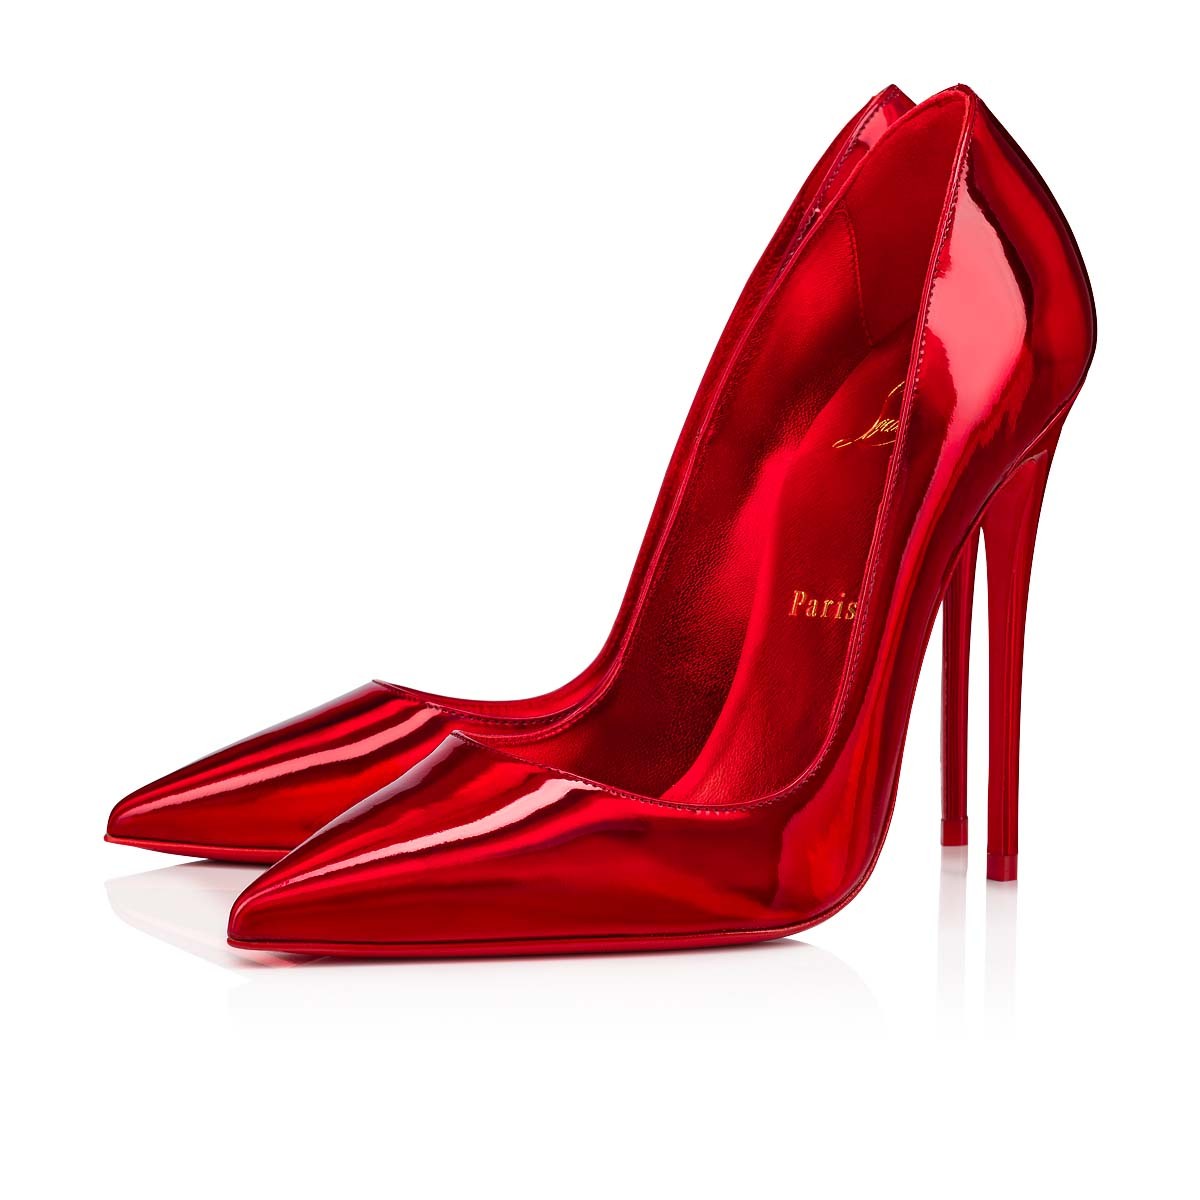 So Kate 120 mm Pumps Loubi Patent Calf Psychic Red